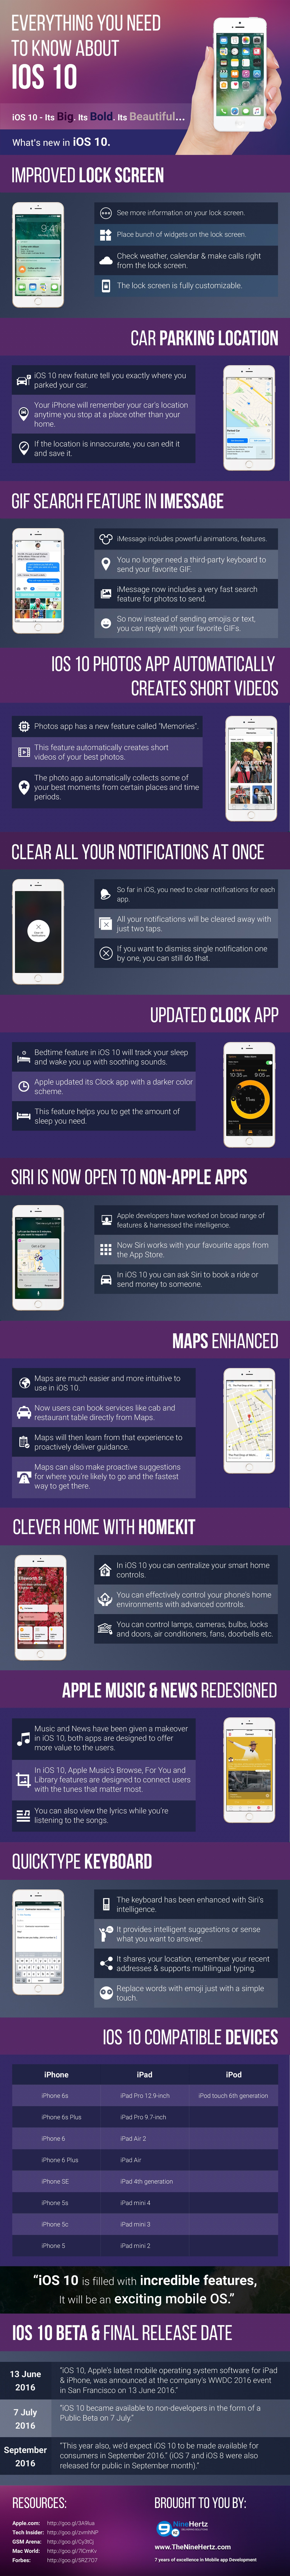 Everything You Need to Know About iOS 10 (Infographic)